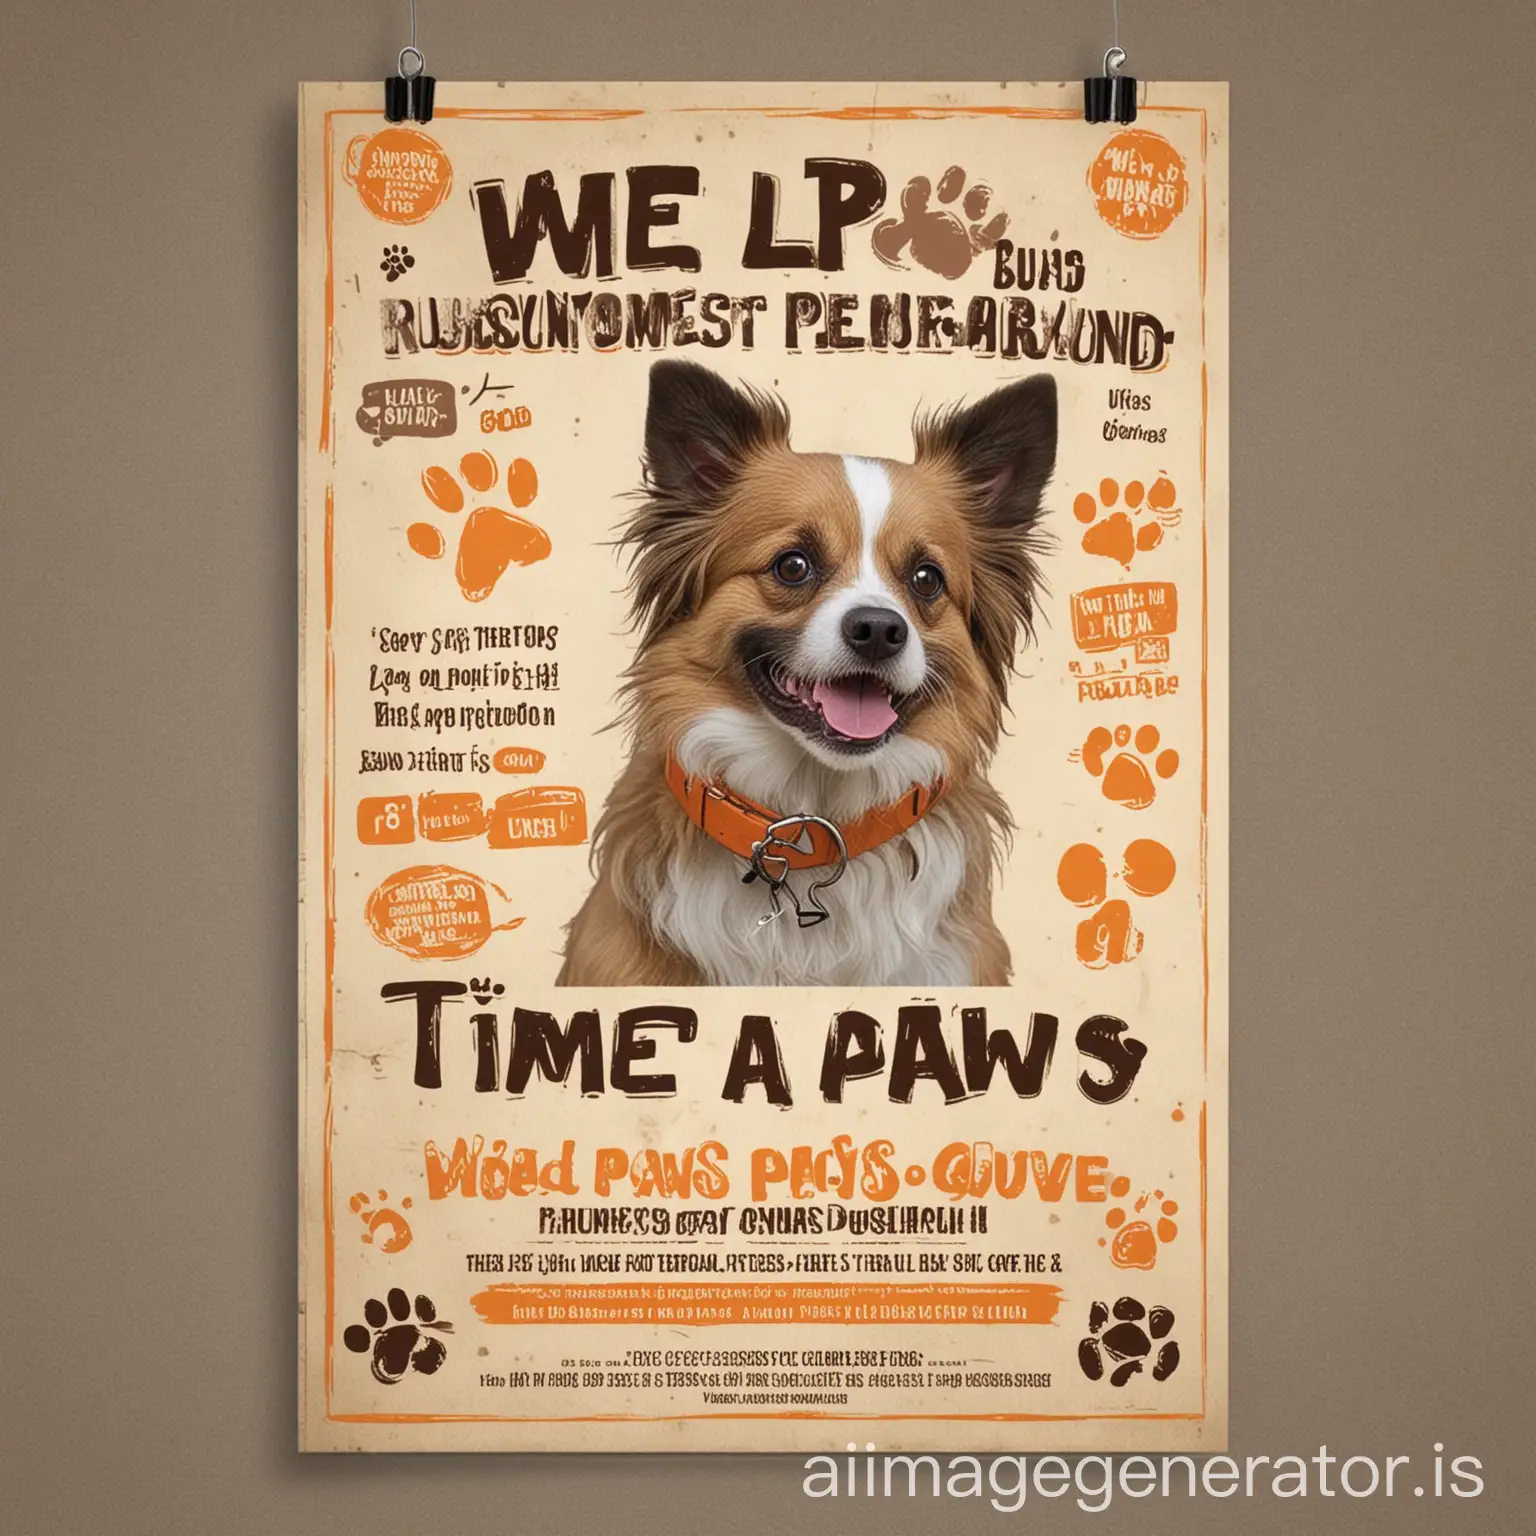 create a poster flyers 
for posting for our business time paws a dog playground where owners and dogs are able to have fun, put some word of encouragement for them to visit the plaground